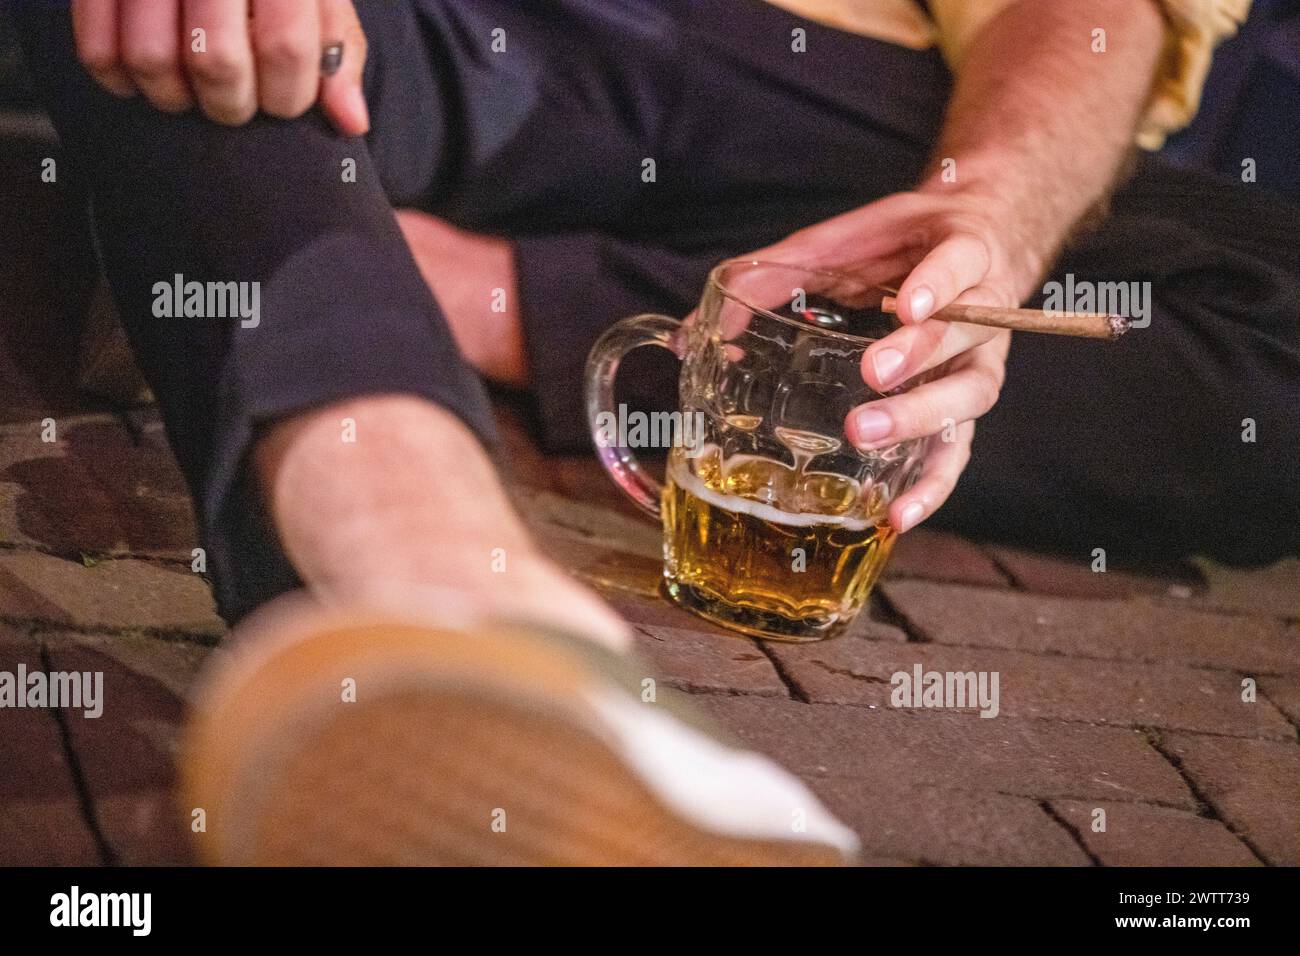 A close-up view of a person?s hand holding a cigar with a mug of beer resting on a brick pavement. Stock Photo